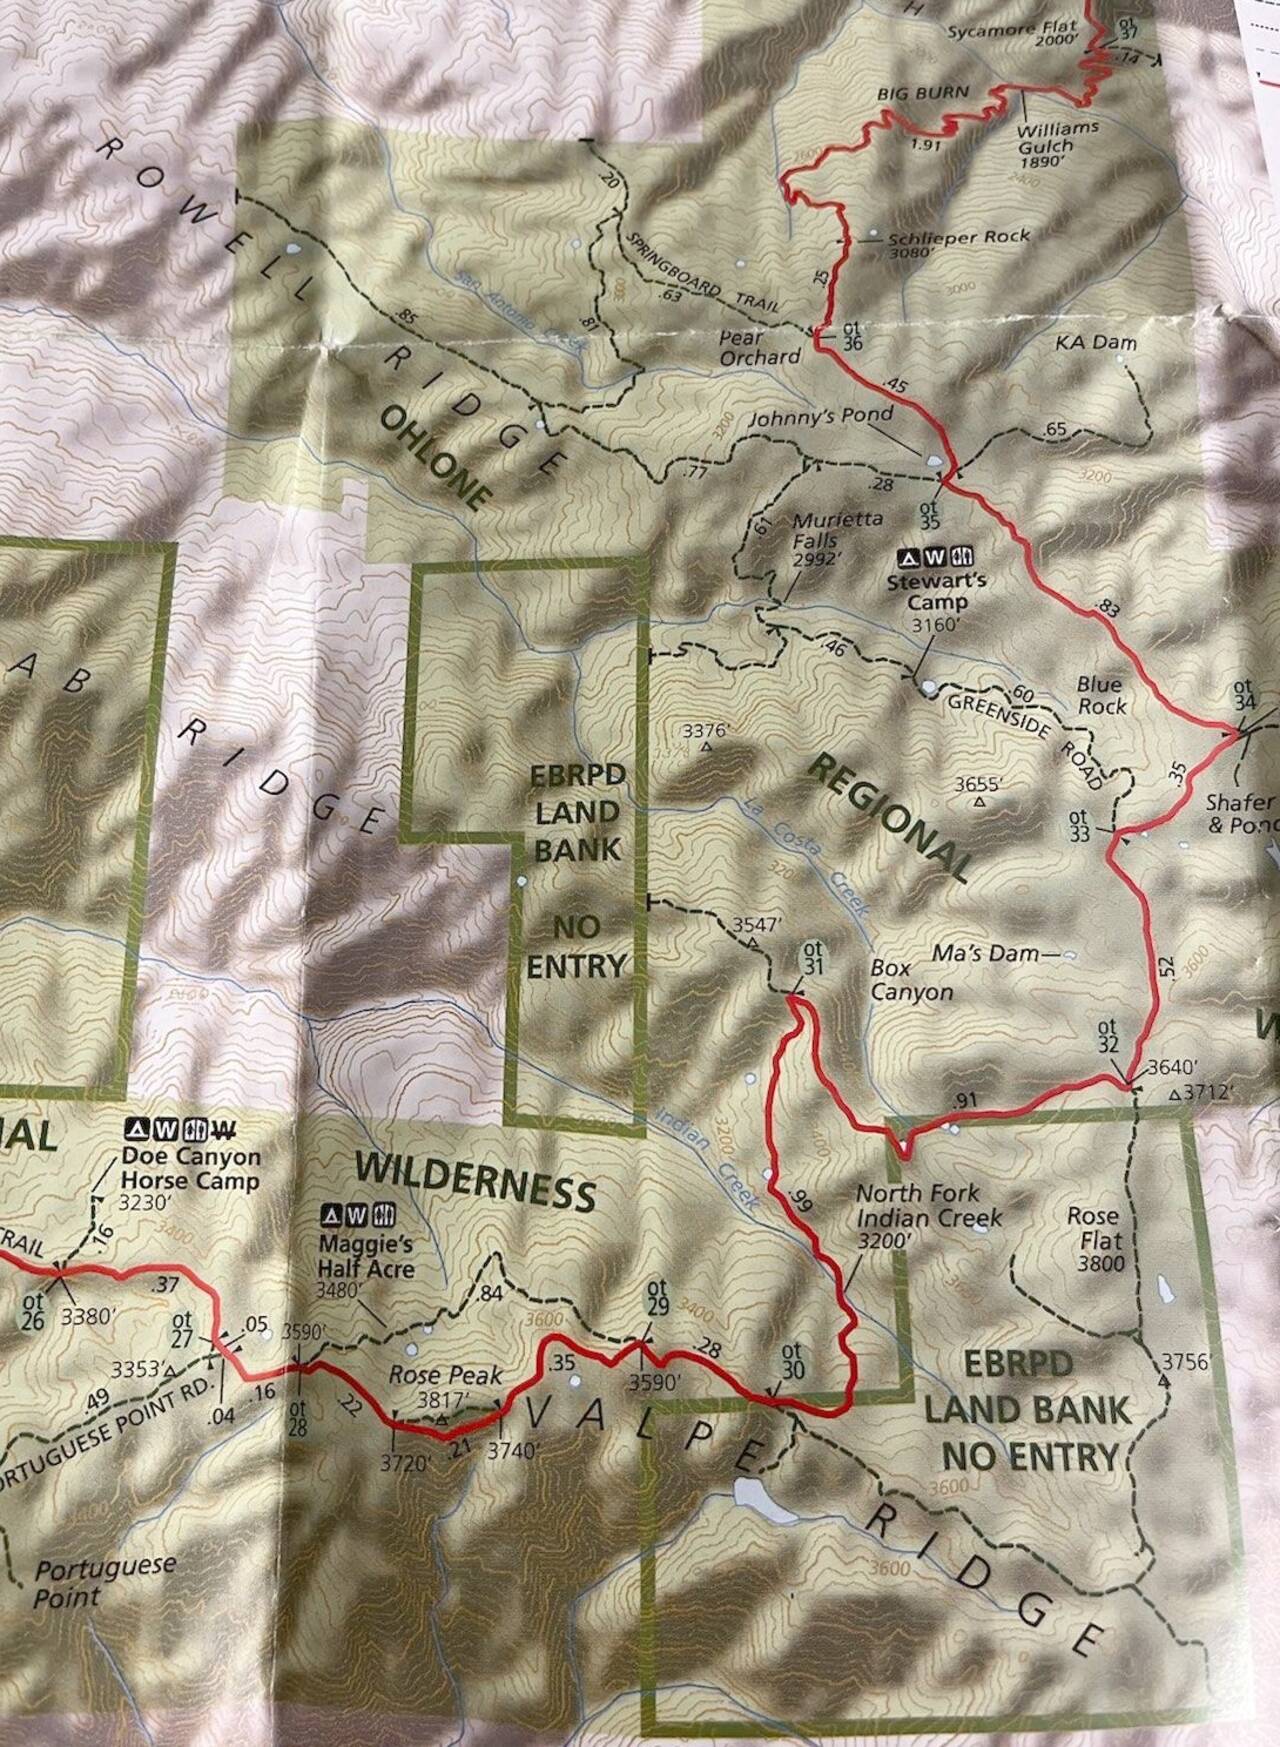 A closeup of a topographic map showing the southeast corner of the route